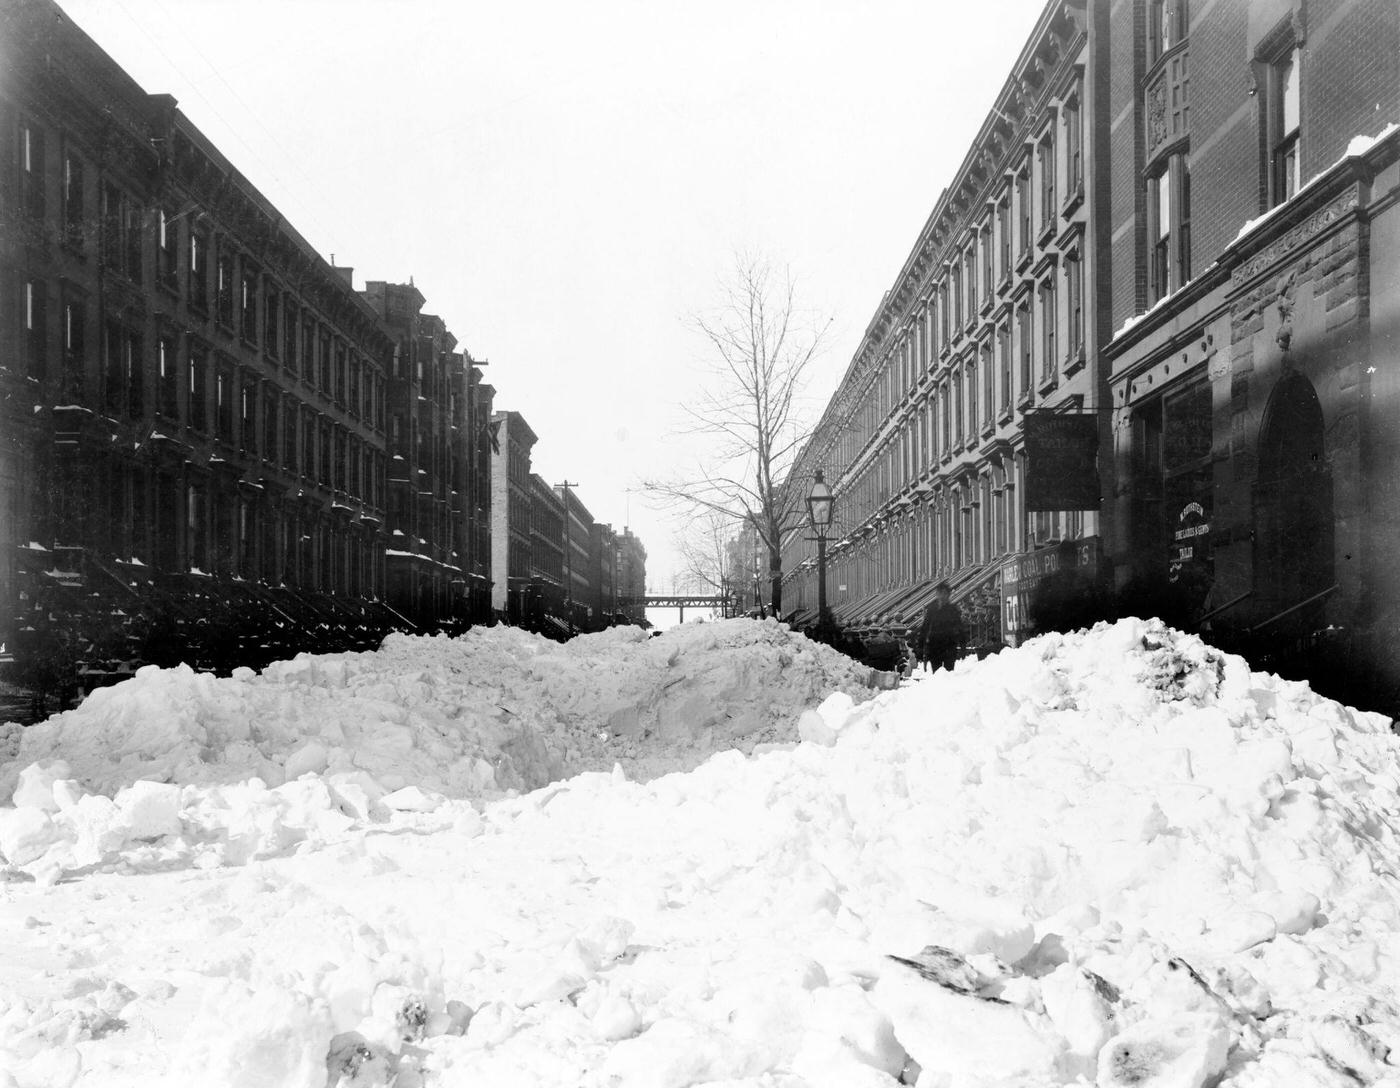 Harlem After The Blizzard: Snow-Filled Street In Harlem, New York City, 1899.